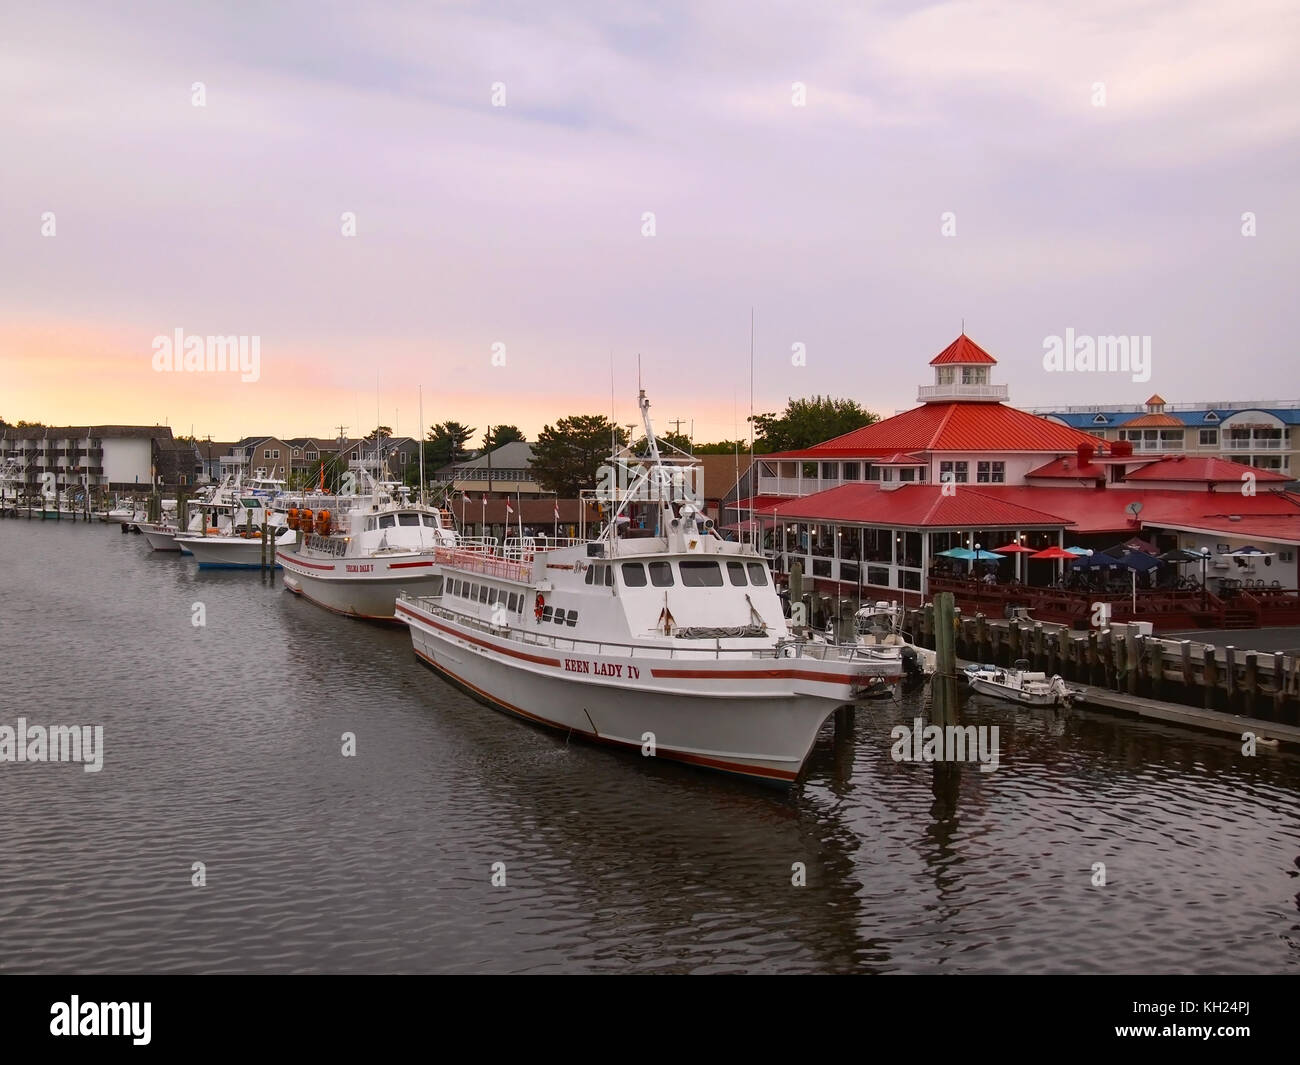 LEWES, DELAWARE - AUGUST 29, 2017: Tour boats and fishing boats are moored in the harbor at sunset in Lewes, Deleware, a United States eastern shore t Stock Photo